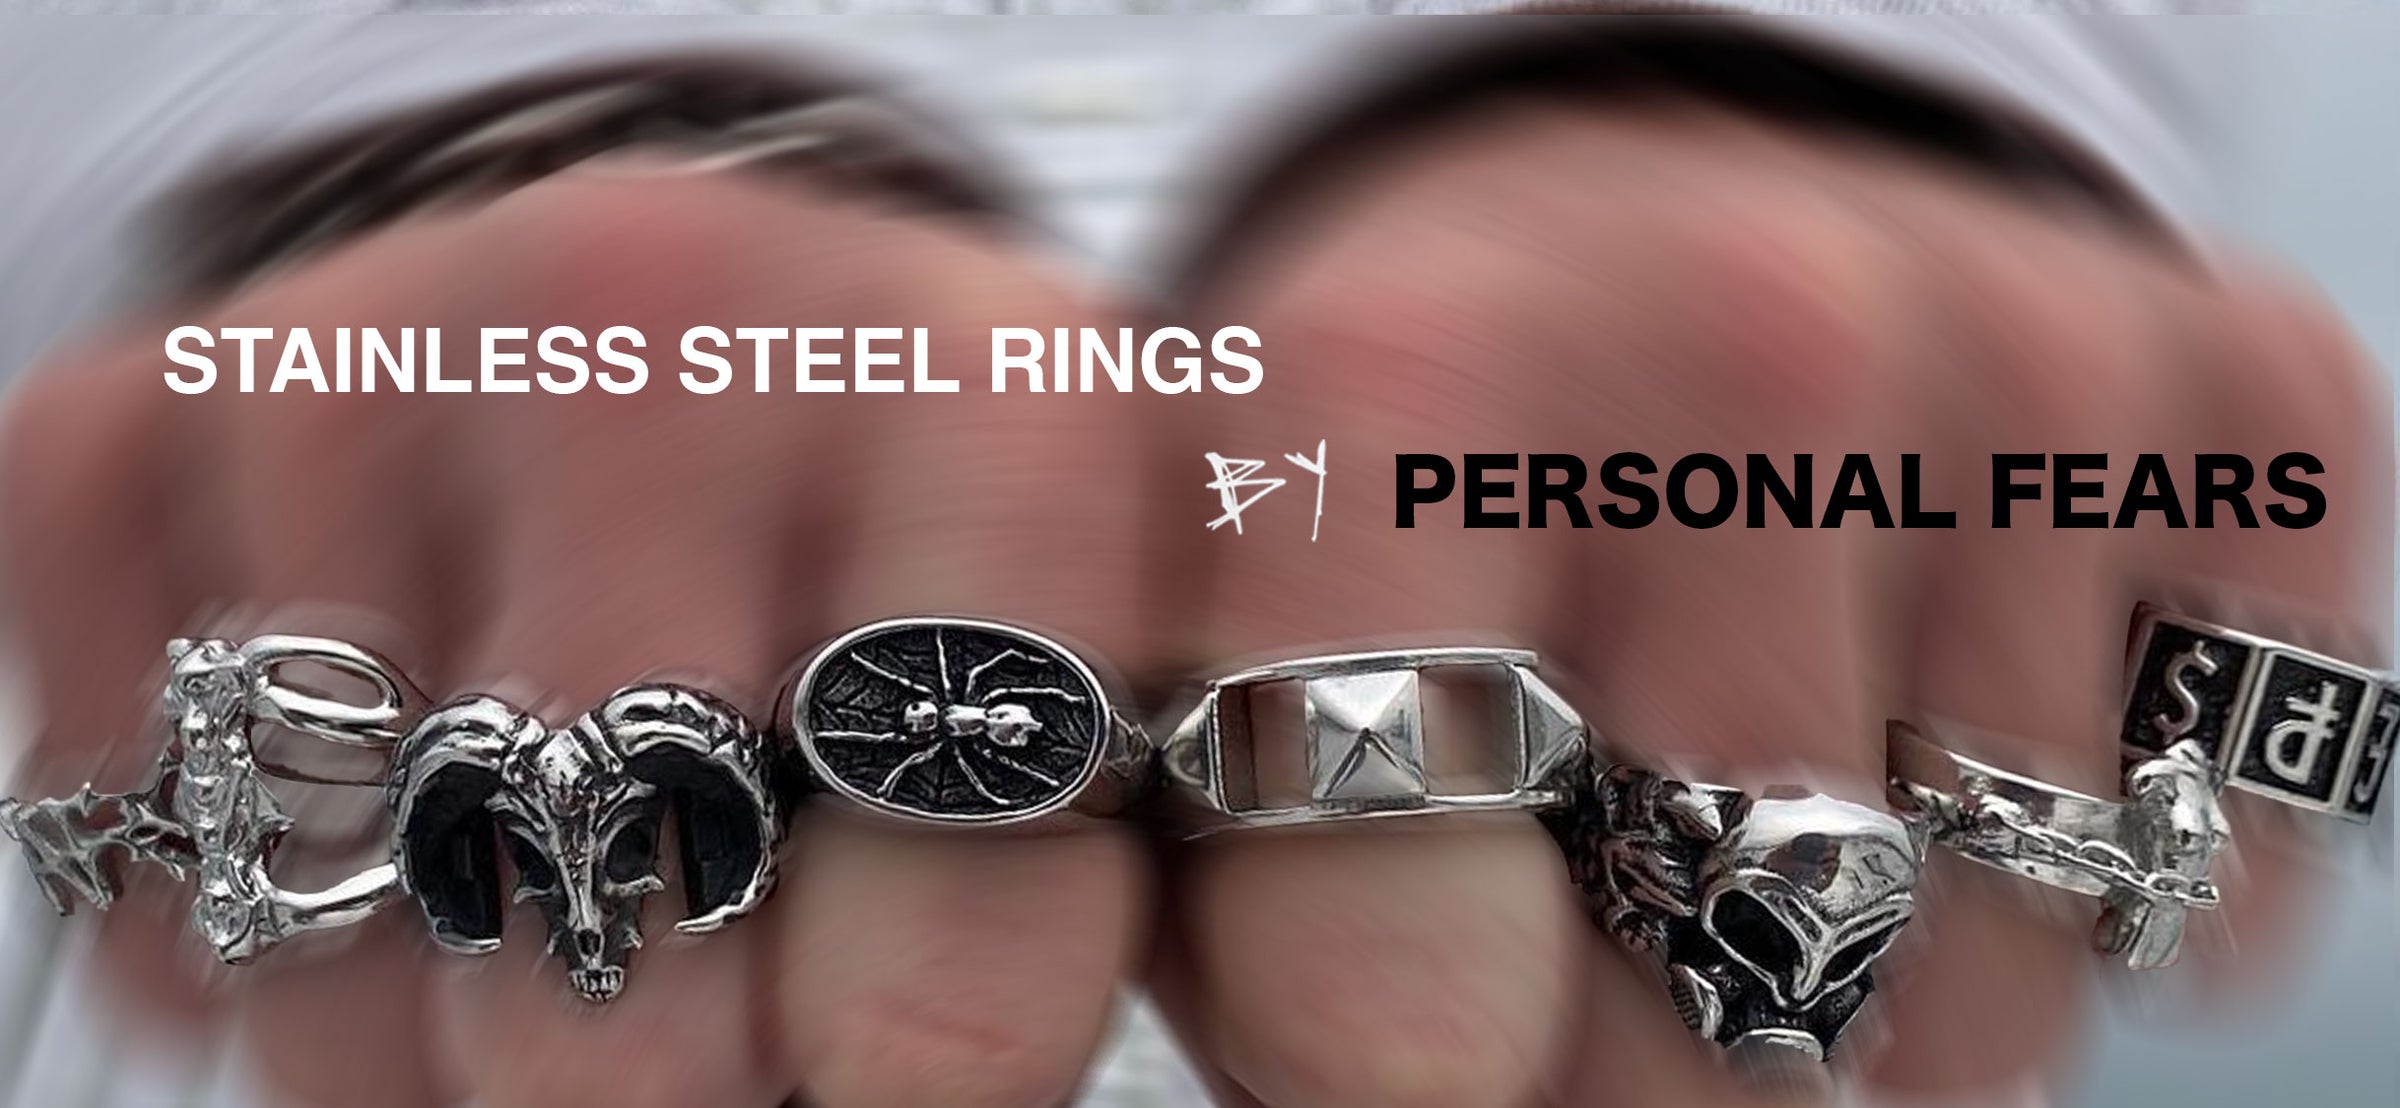 Stainless Steel Rings By Personal Fears